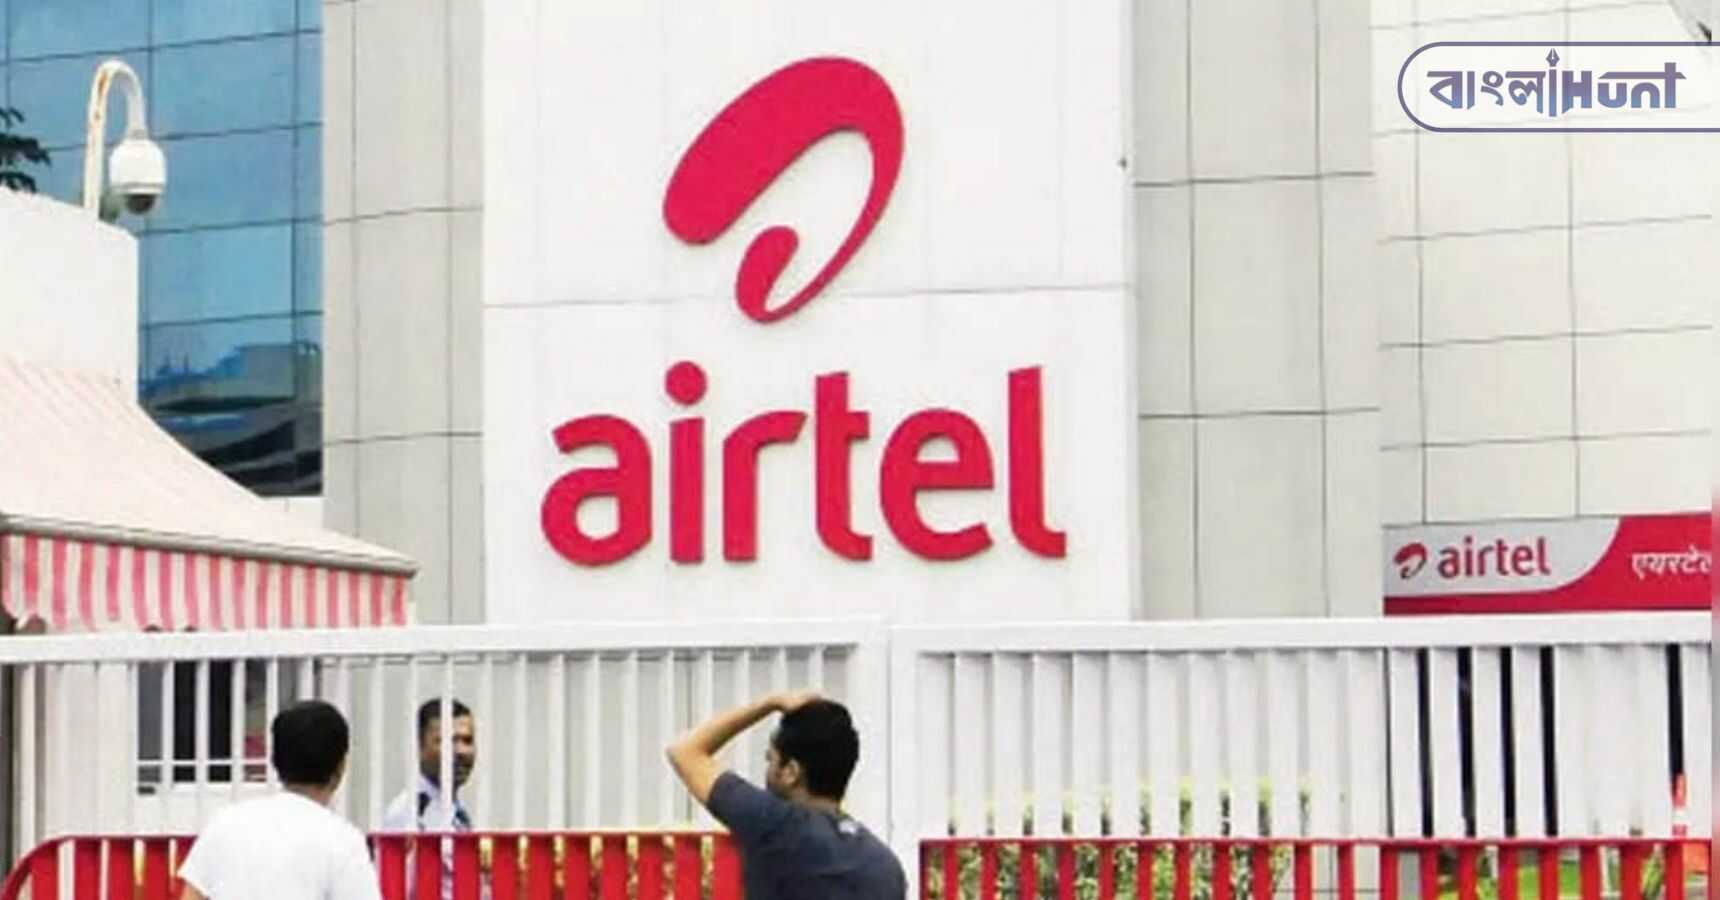 Bharti Airtel,Recharge Plan,Minimum Monthly recharge,Price Hike,Telecom industry,Tech News,Bangla,Bengali,Bengali News,Bangla Khobor,Bengali Khobor,Indian Rupee